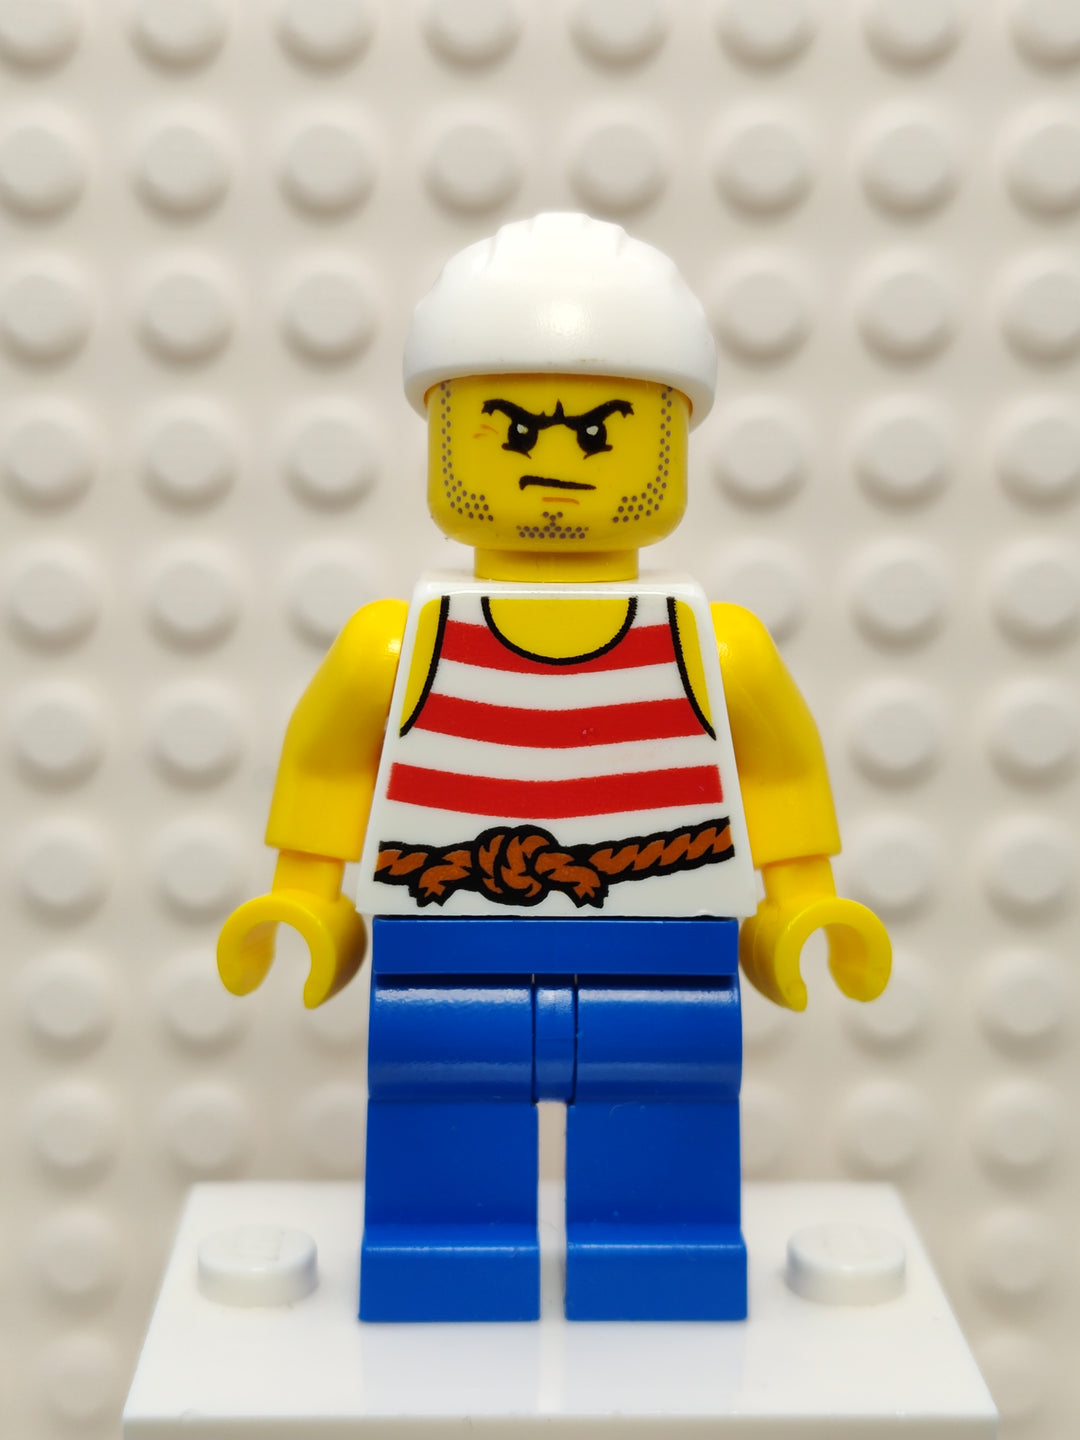 Lego Pirate 9 - Red and White Stripes, pi170